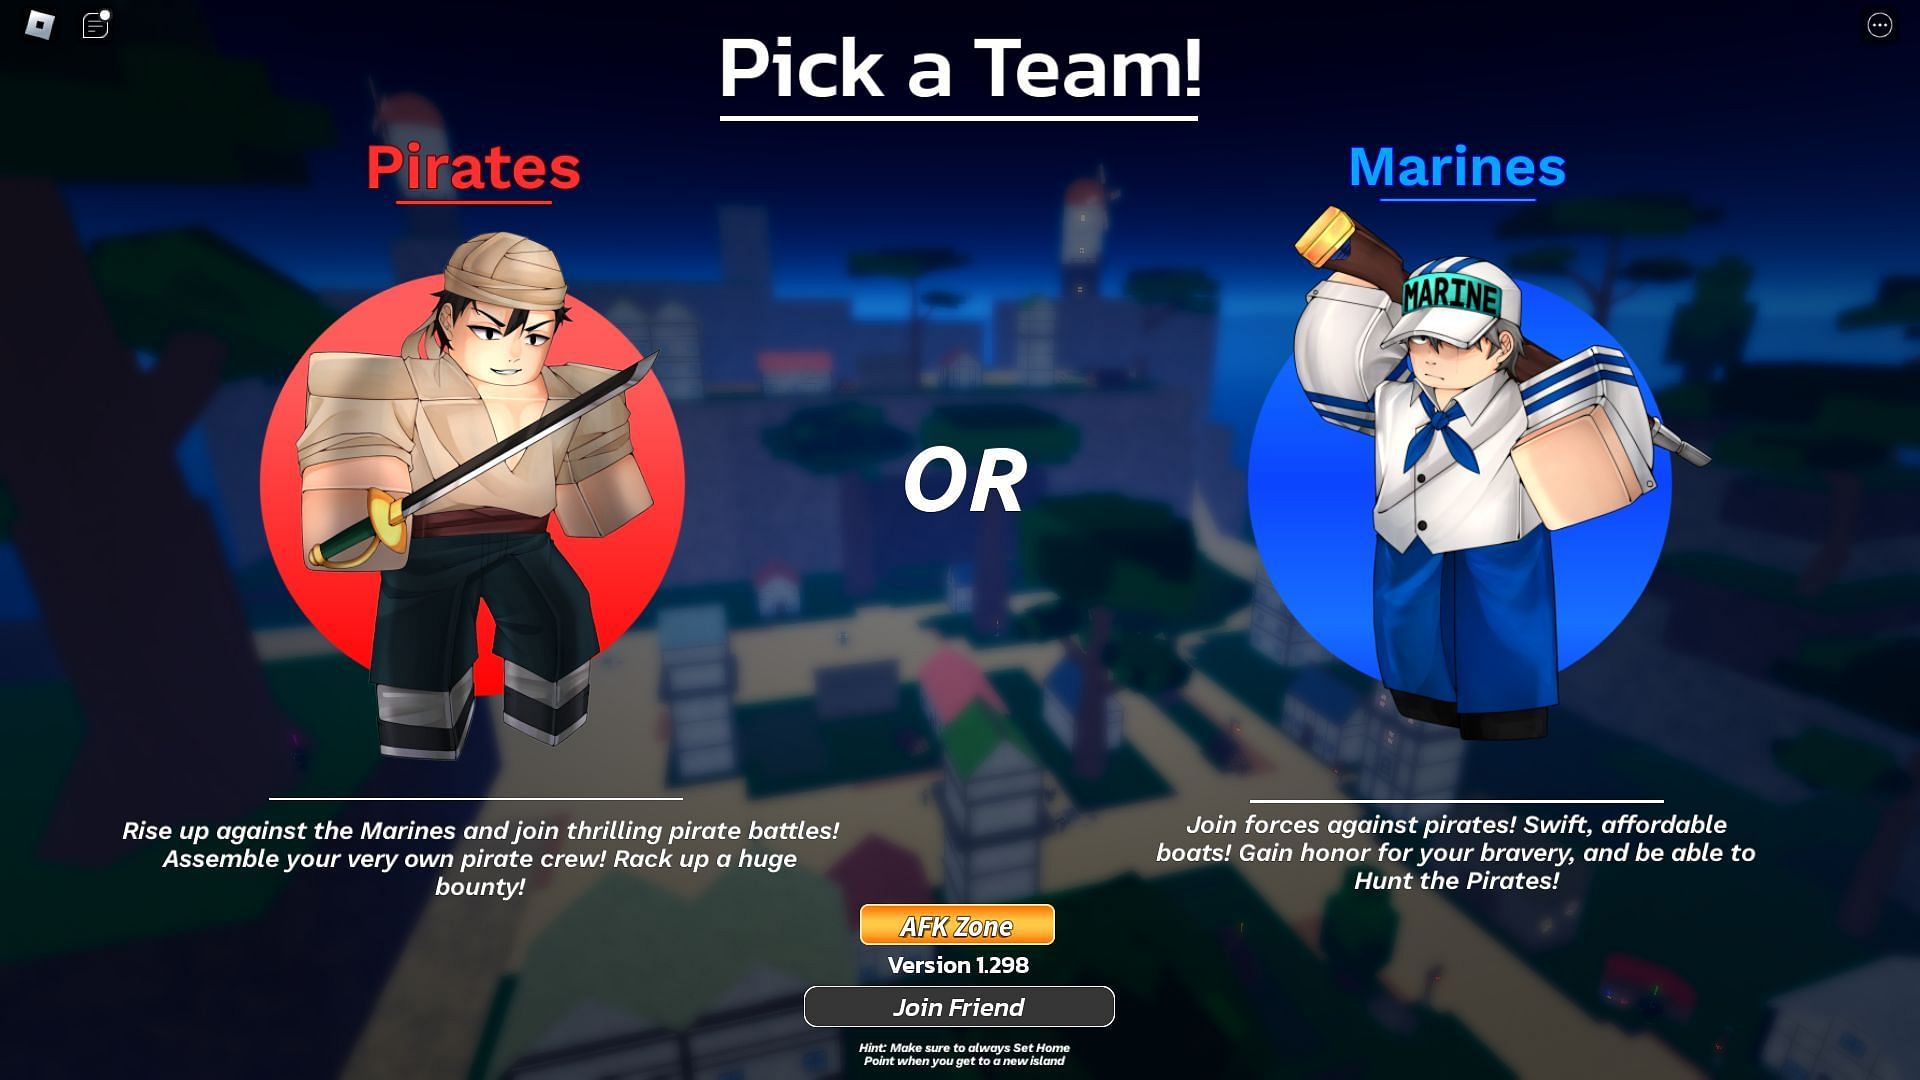 Picking a team when loading into the game (Image via Roblox)